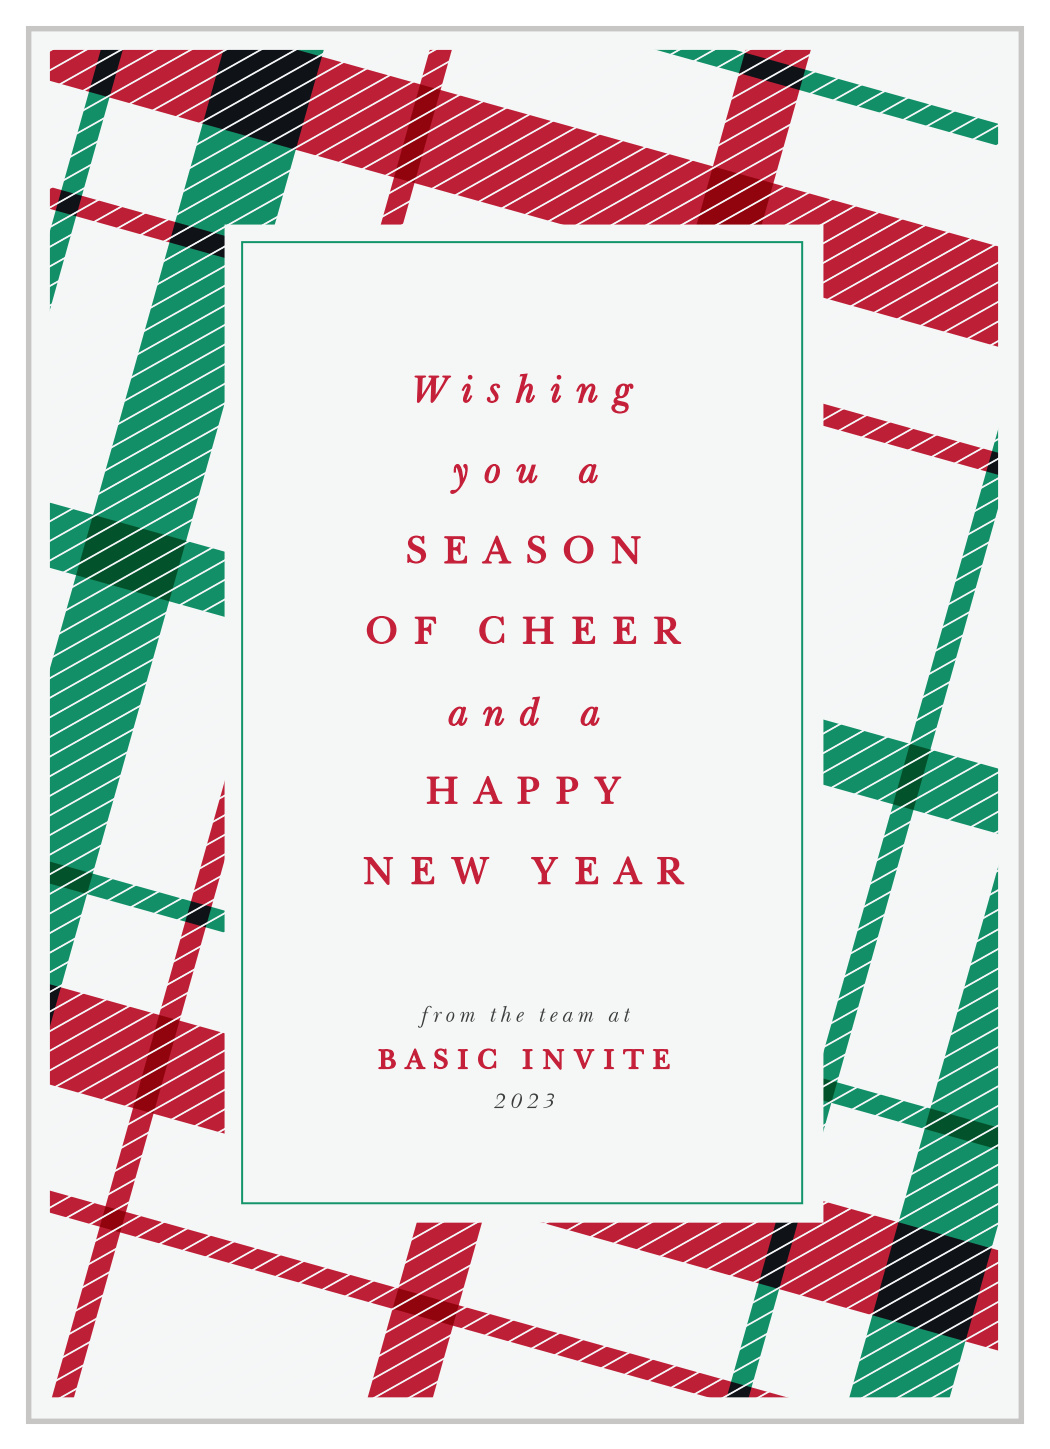 Tilted Plaid Corporate Holiday Cards